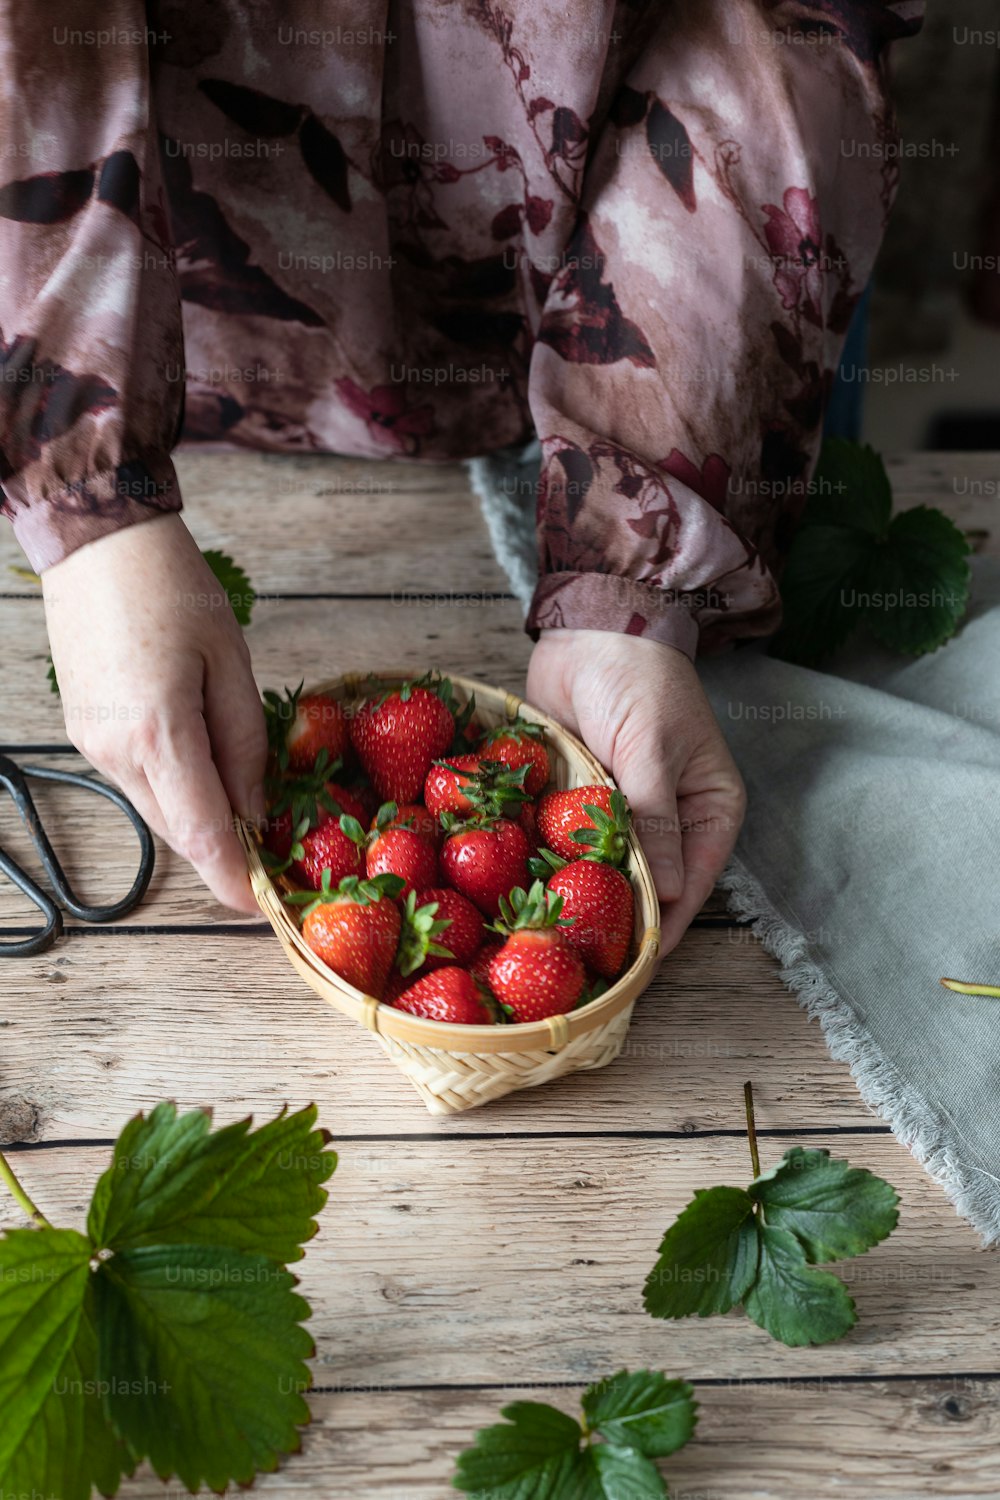 a person holding a basket of strawberries on a table